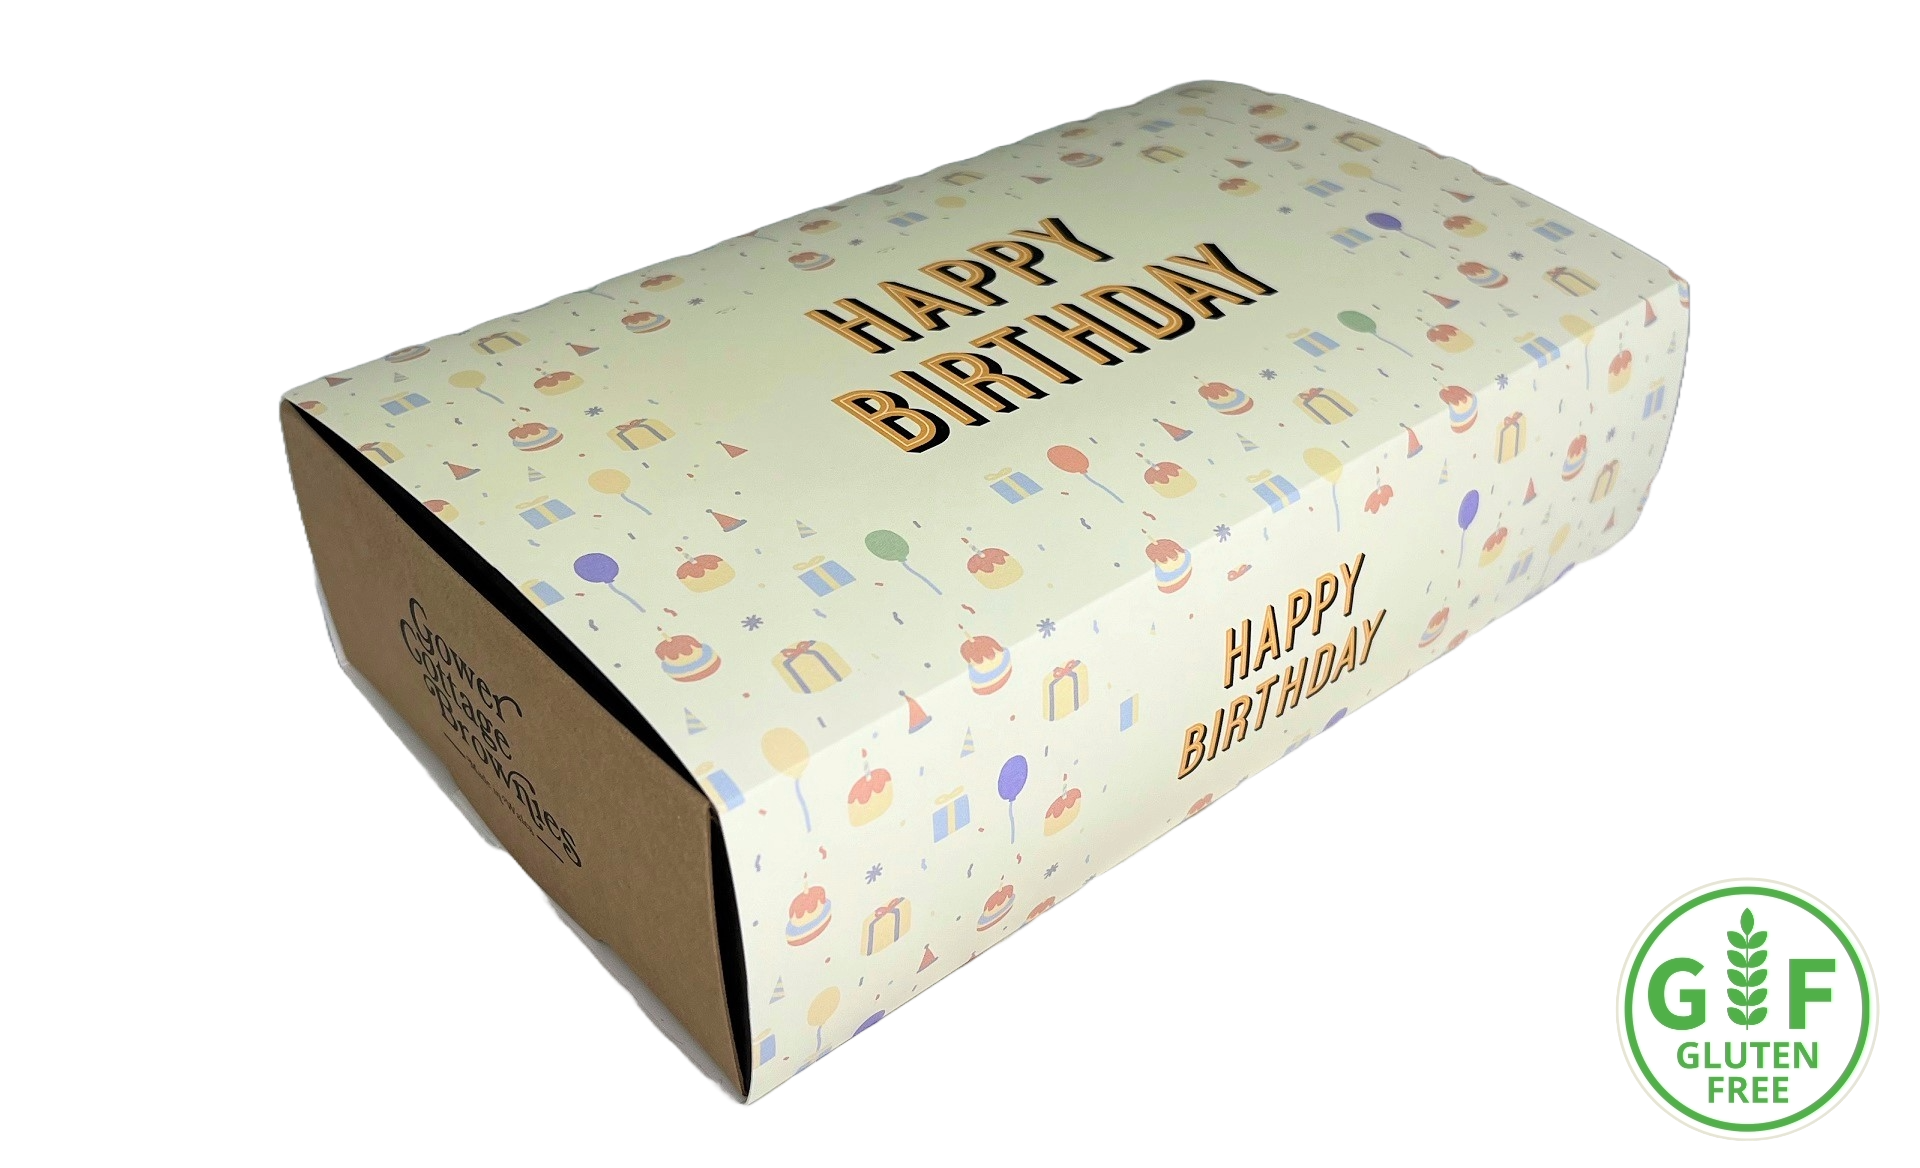 Gluten Free Brownies - Gift Wrapped - Happy Birthday Sleeve